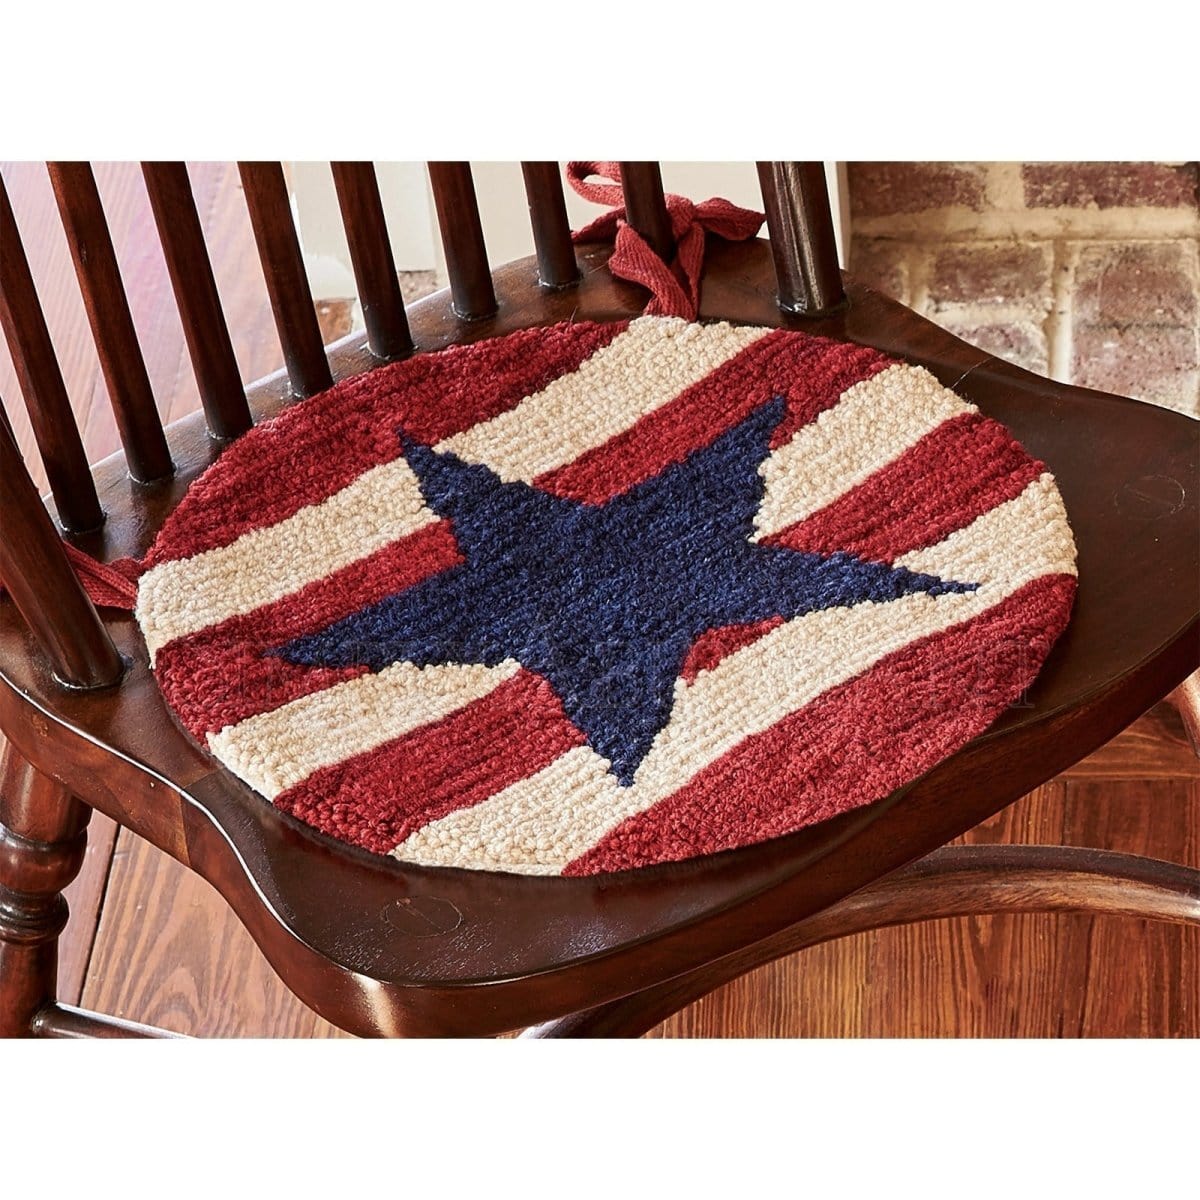 American Star Hooked Chair Pad Round-Park Designs-The Village Merchant